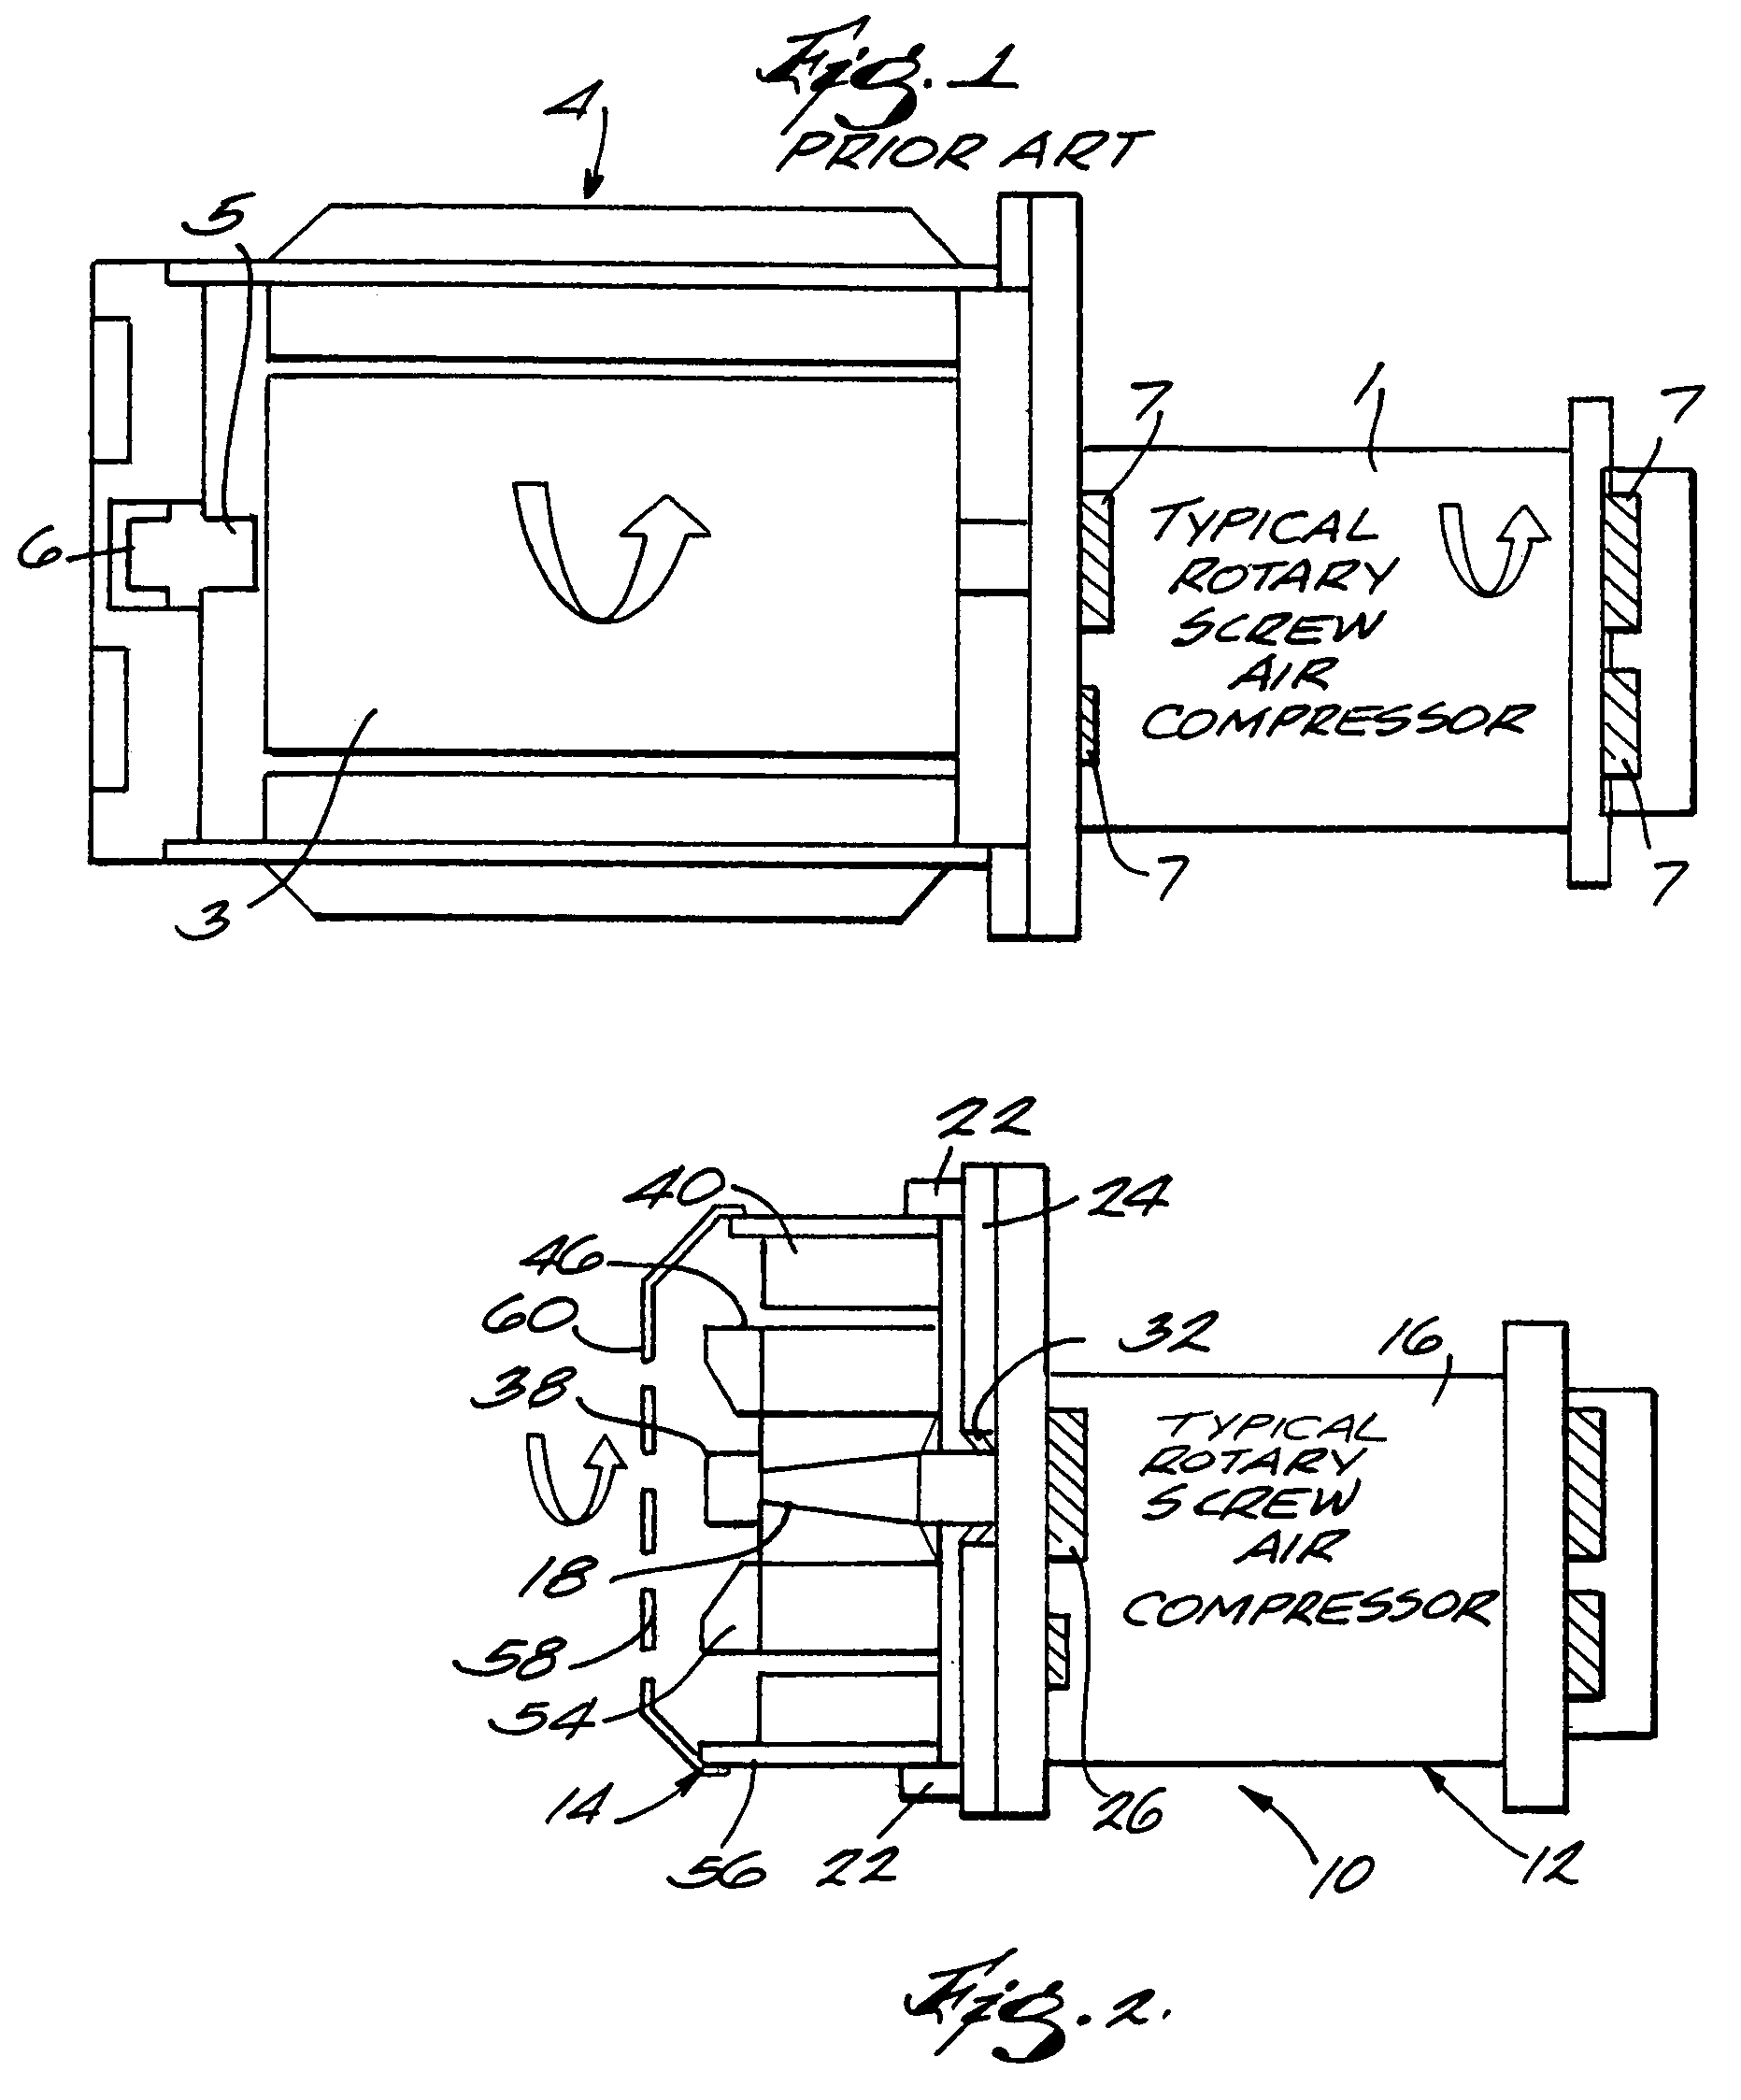 Compressor and driving motor assembly